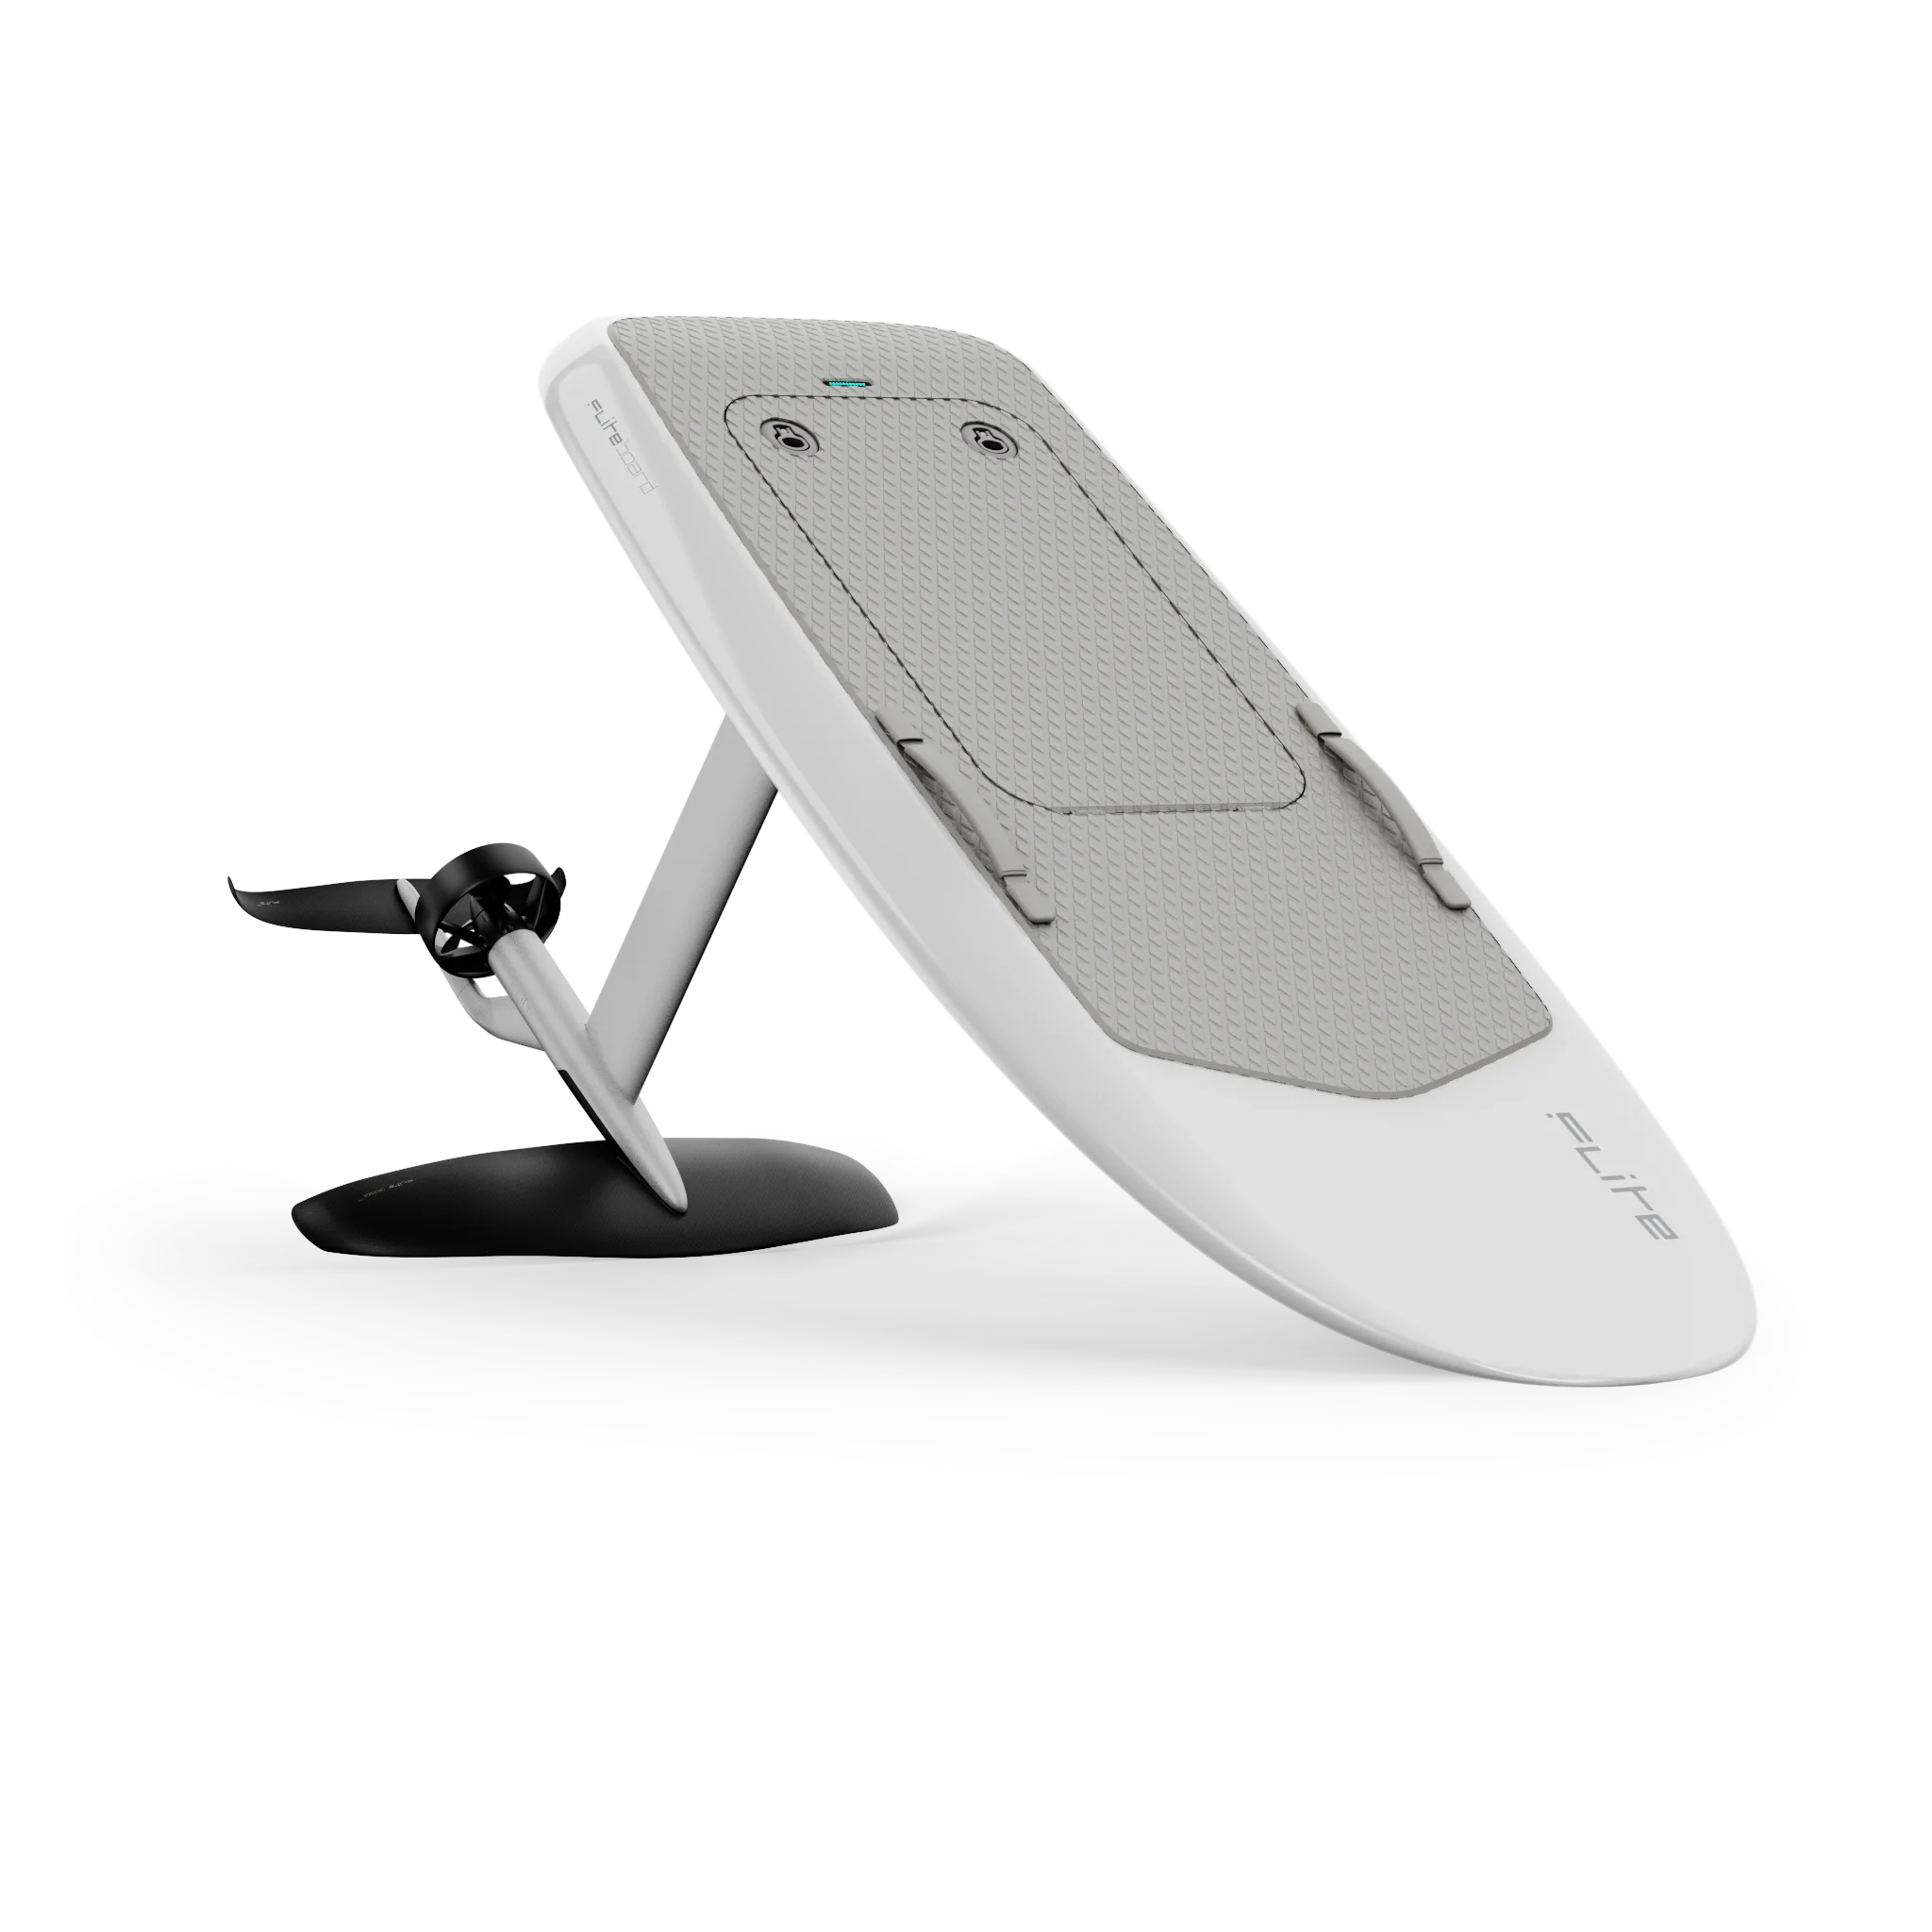 Fliteboard Carbon Classic White